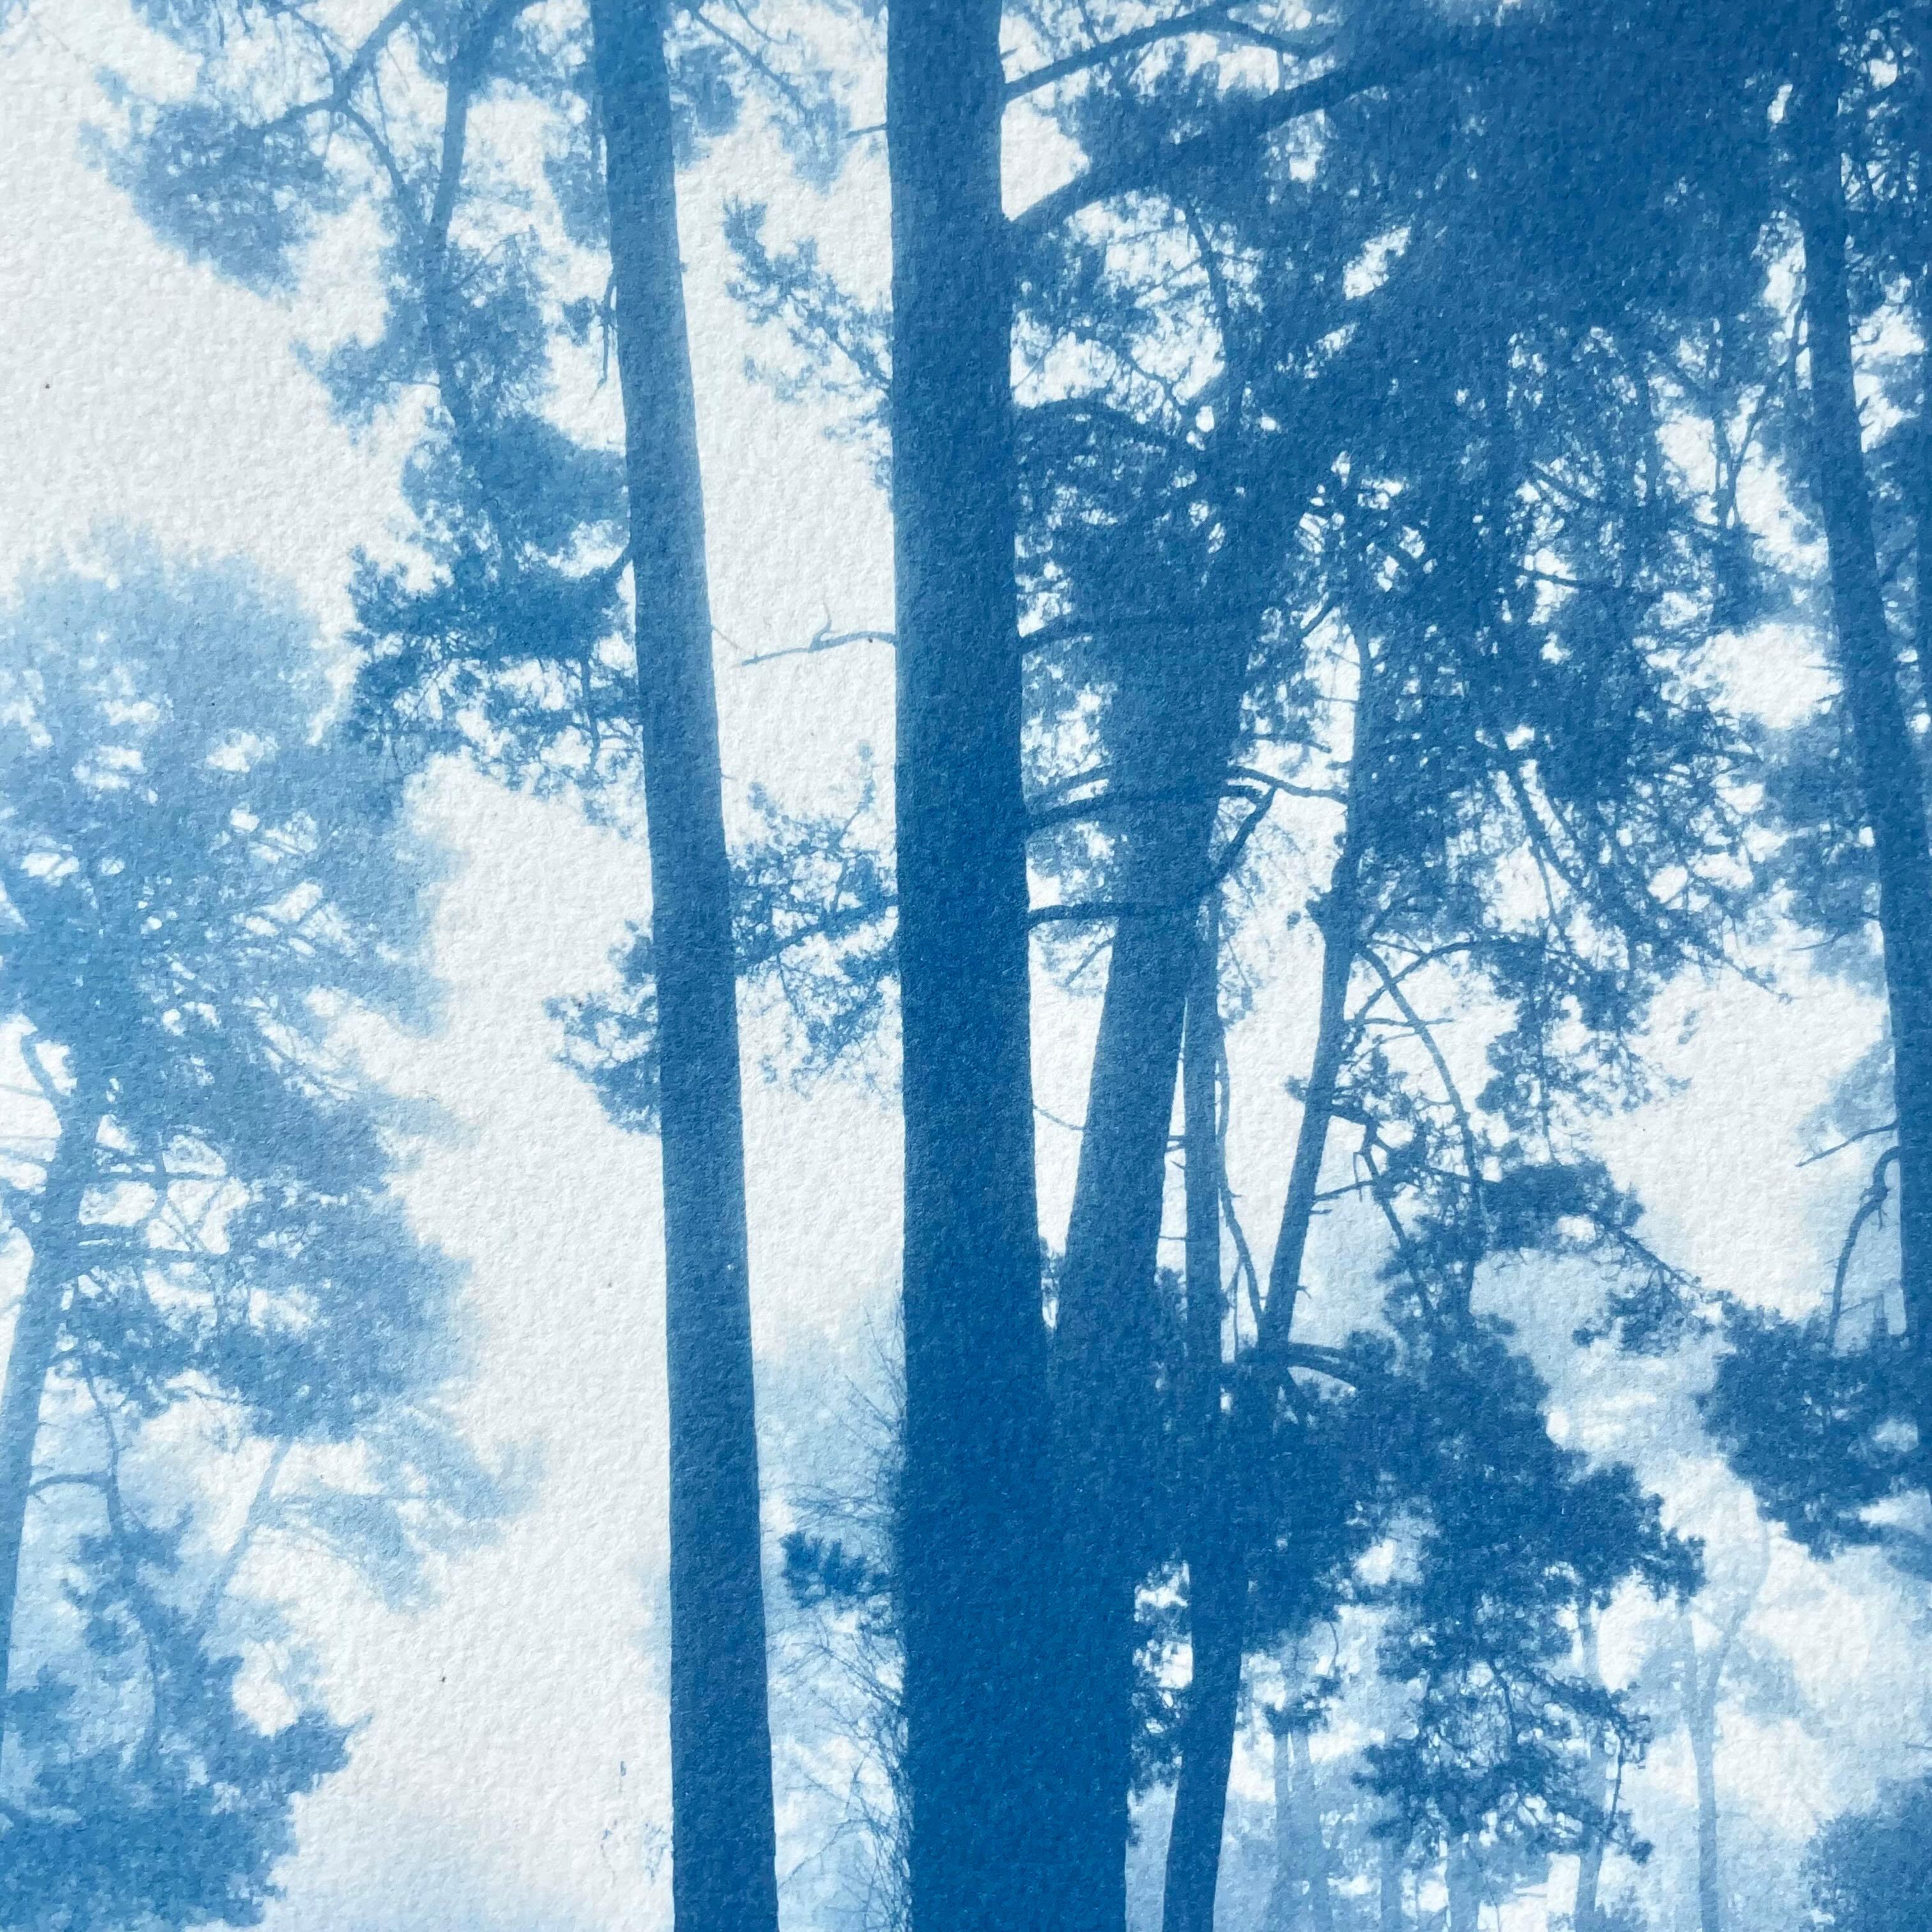 Morning Valley Light (Hand-printed cyanotype, 18 x 24 inches) - Print by Christine So